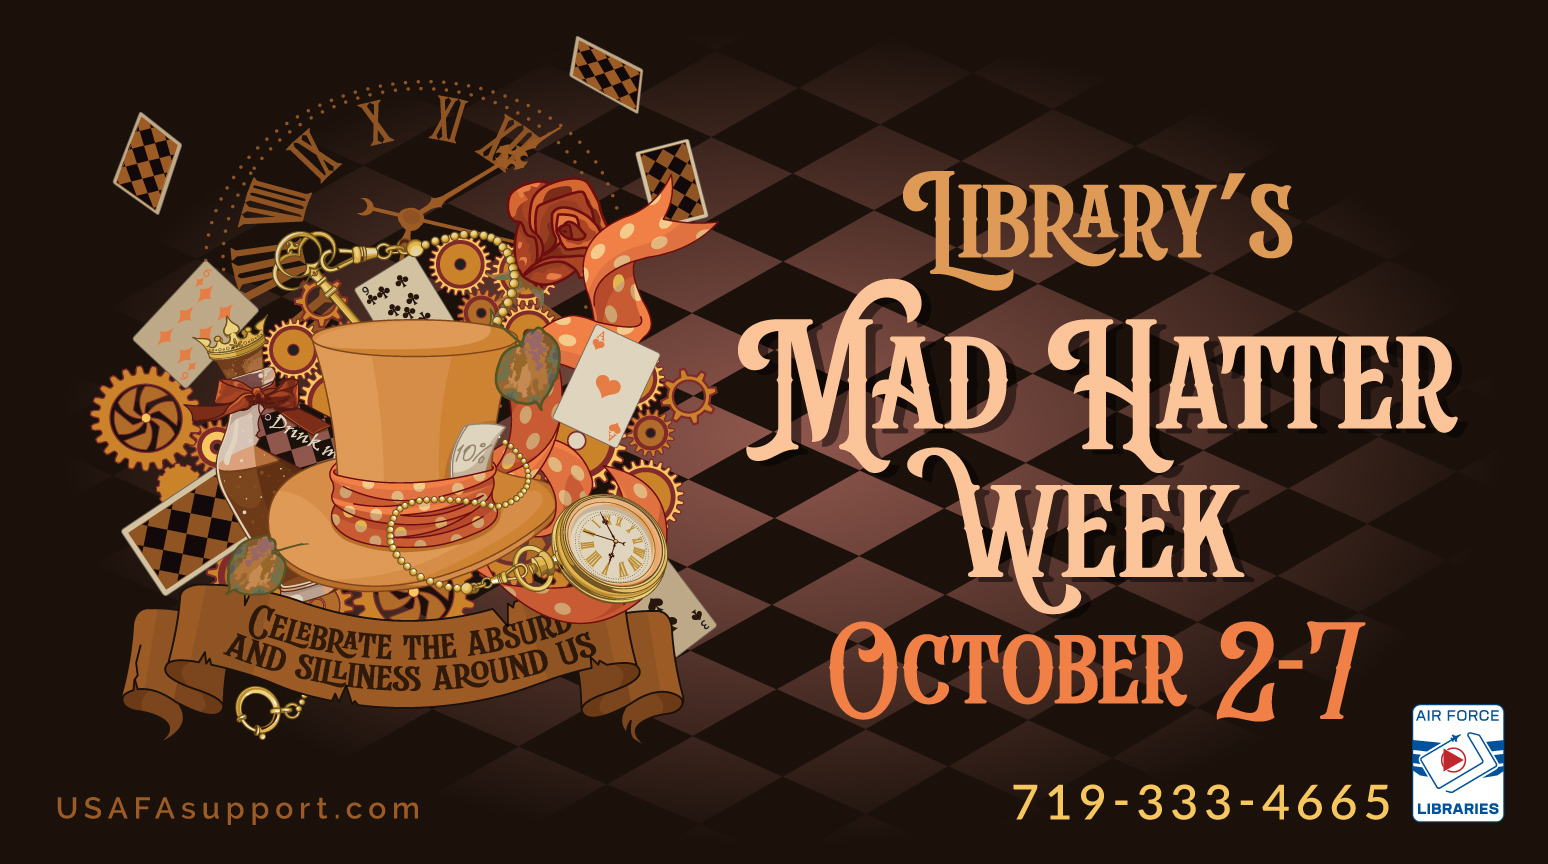 Library_MadHatter_Sld